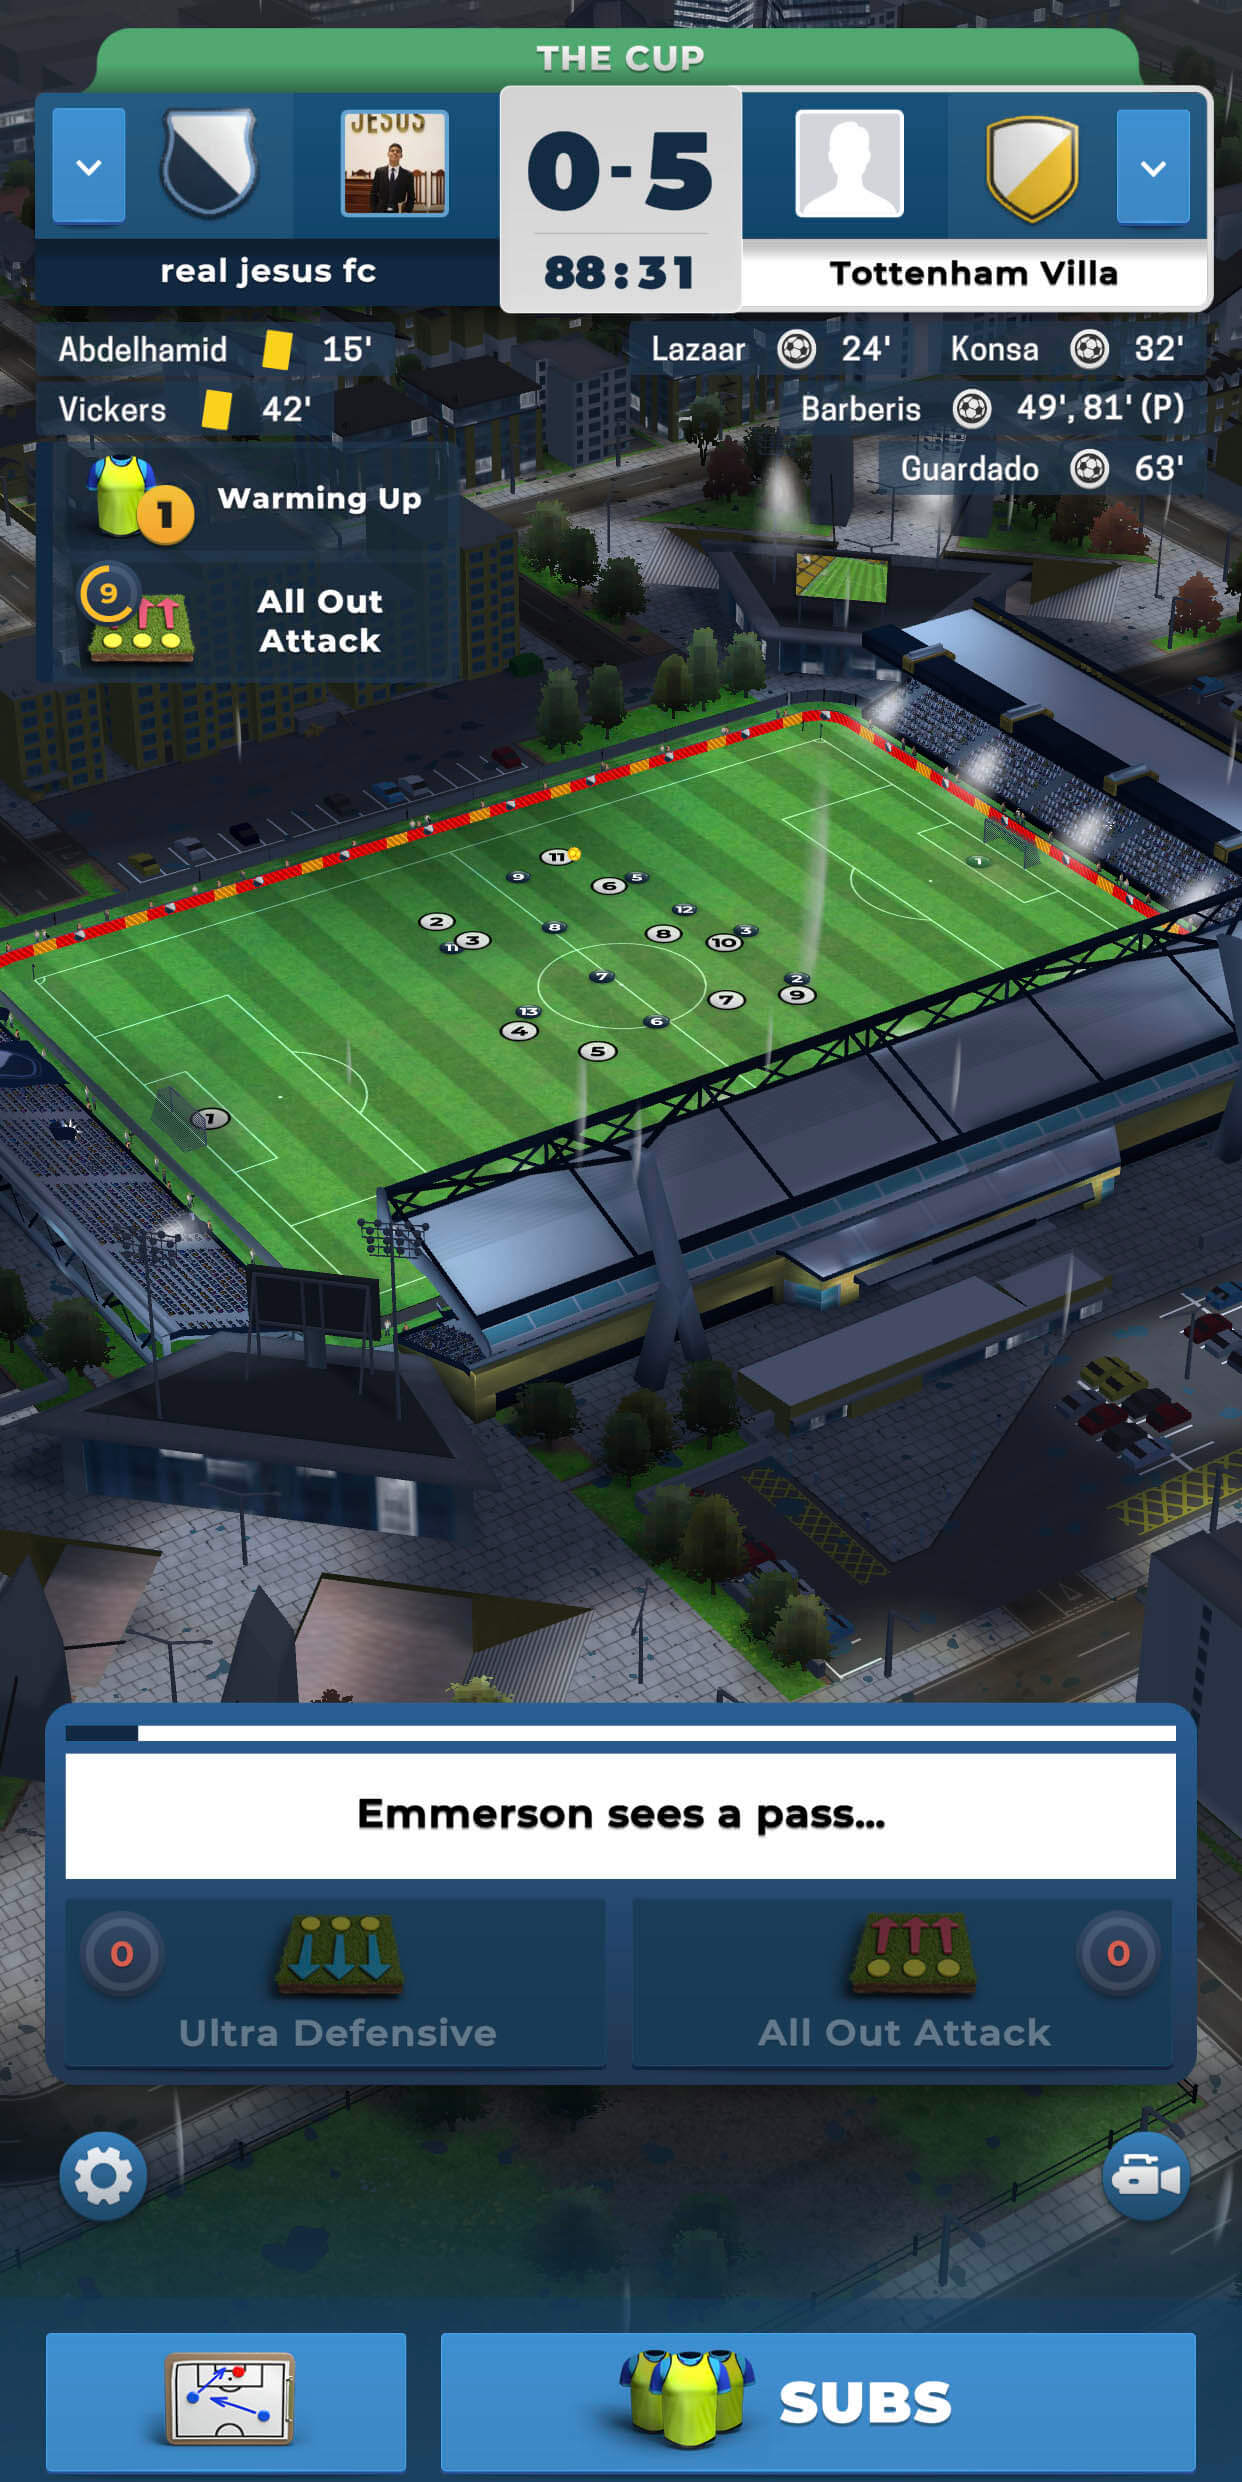 matchday-football-manager-game-mod-ios-3.jpg